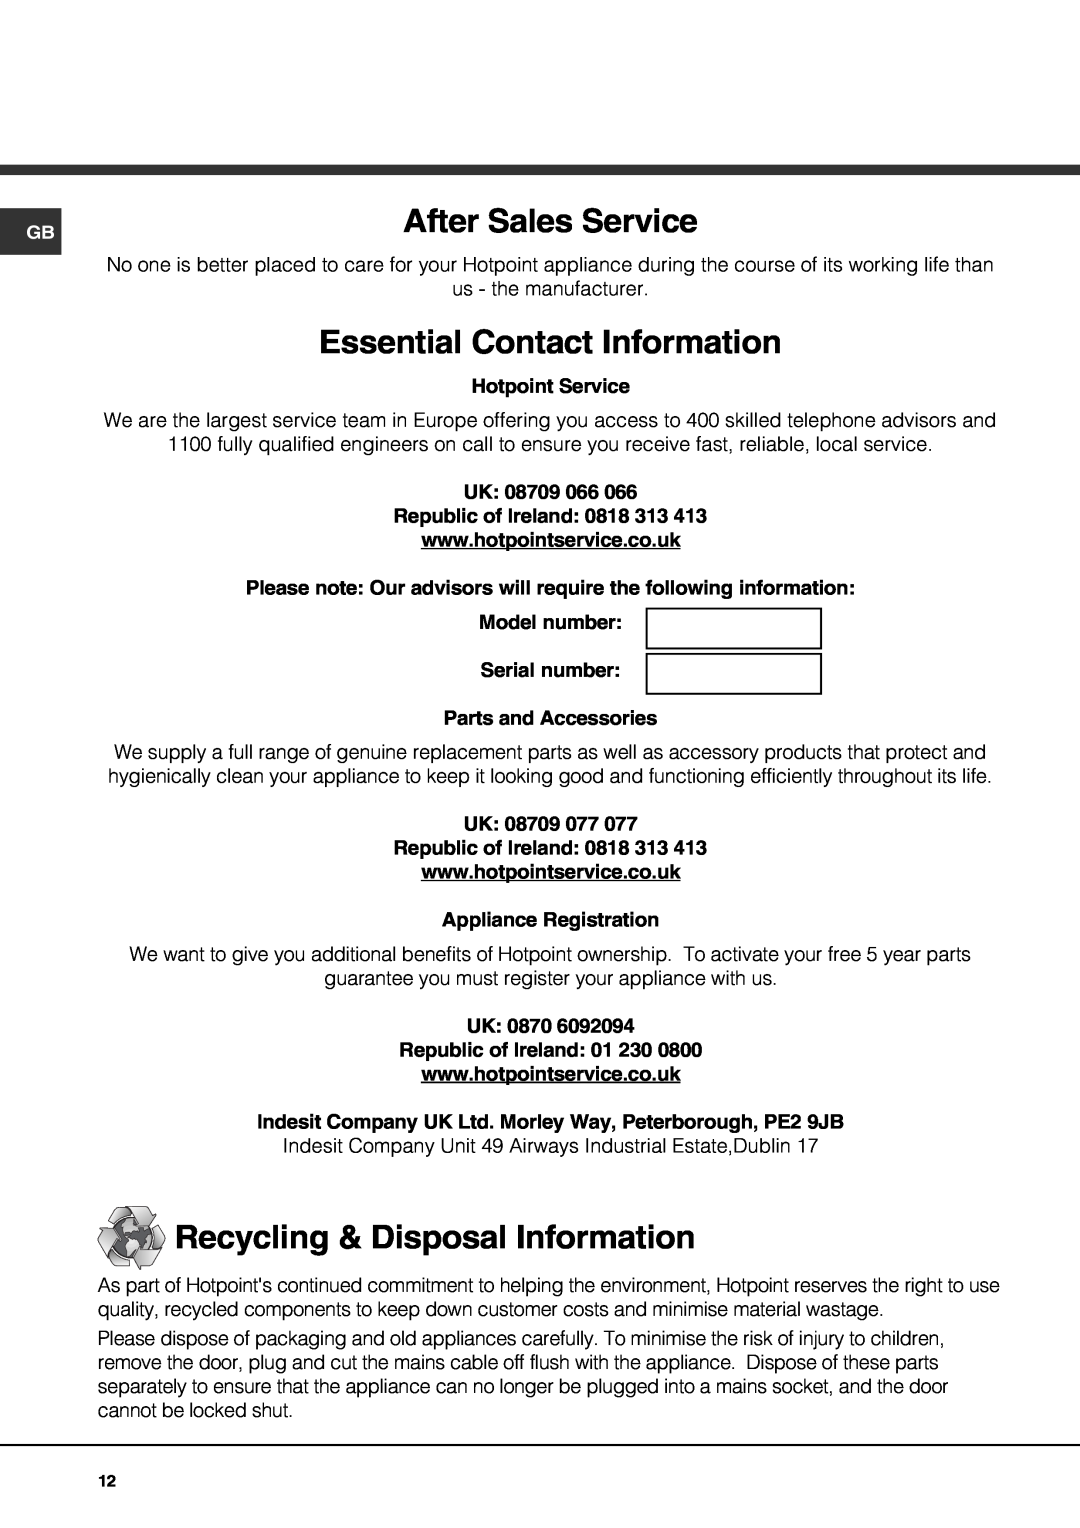 Hotpoint GE750DX After Sales Service, Essential Contact Information, Recycling & Disposal Information 